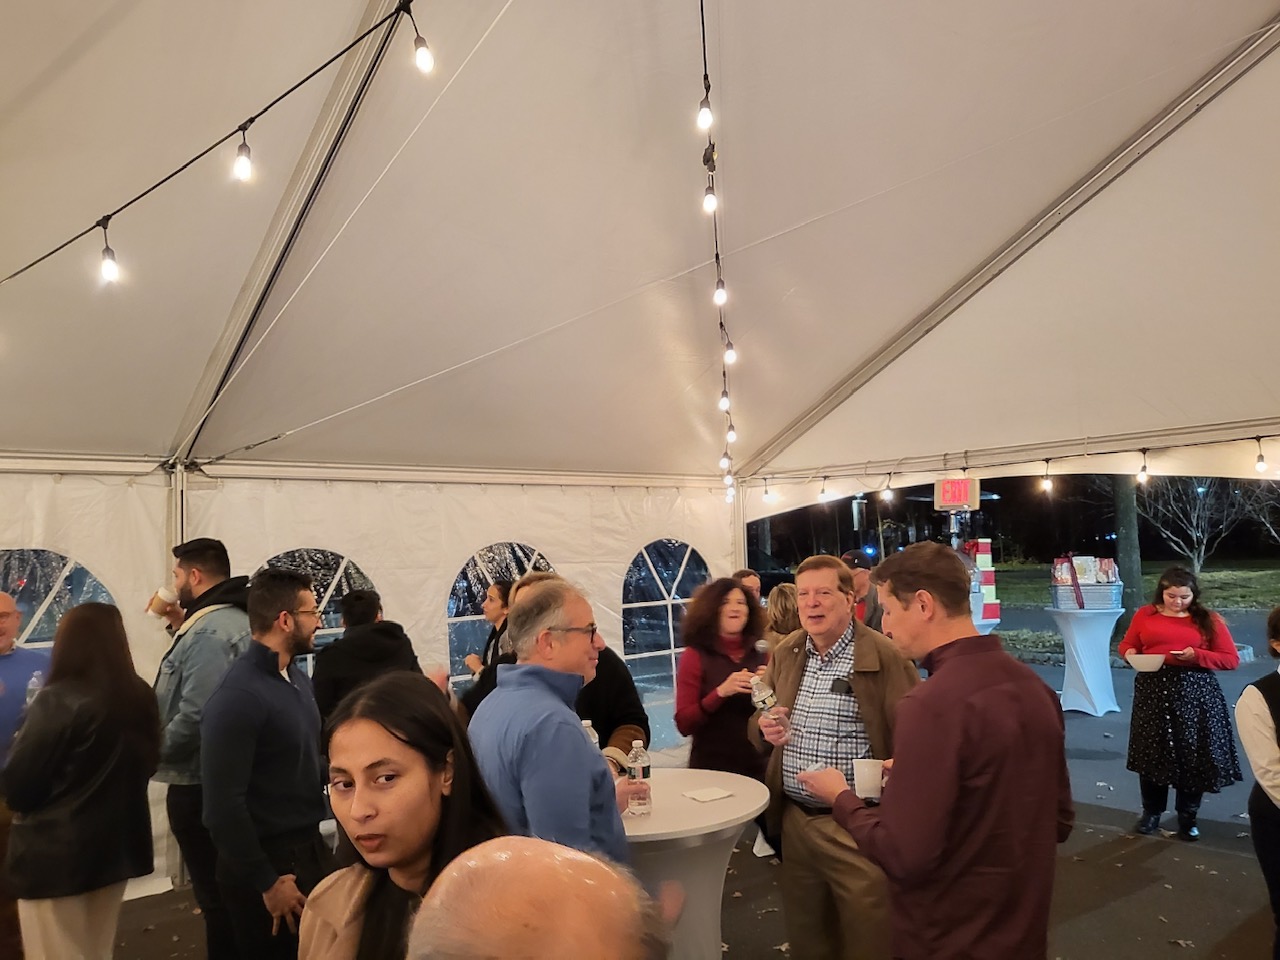 adults mingling in a heated, lighted tent